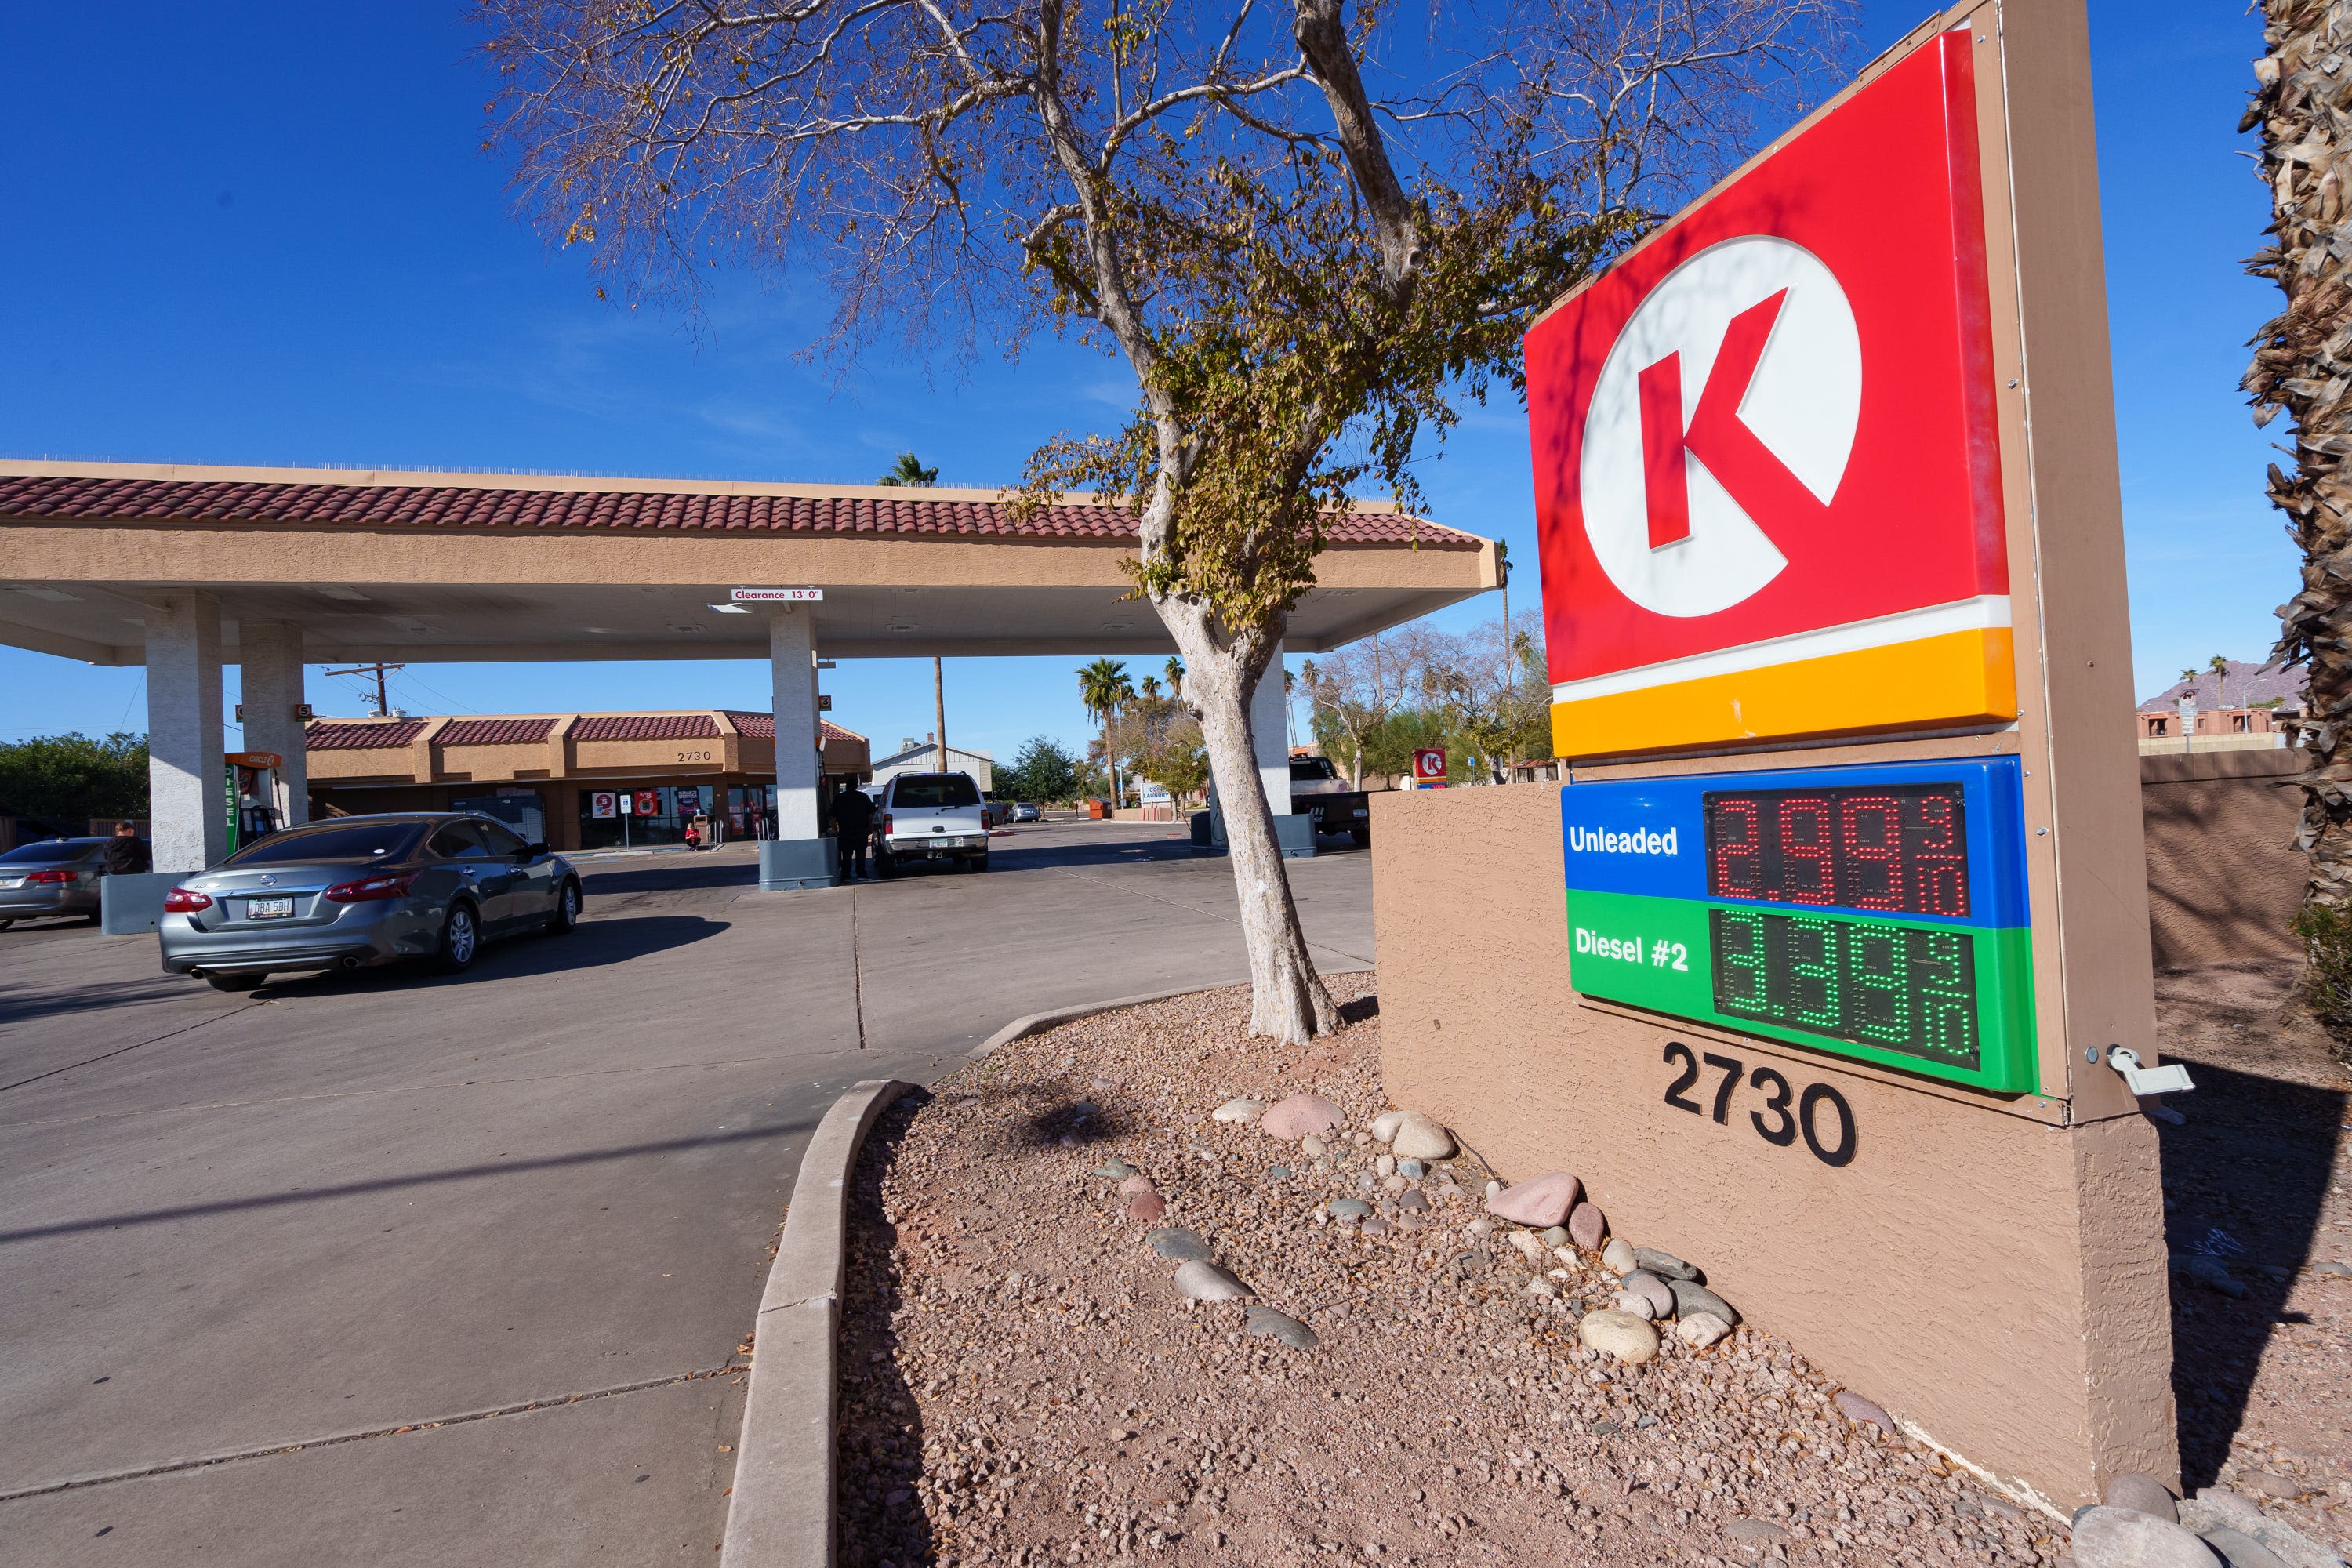 Phoenix gas prices are cheaper than this time last year. How long will it last?